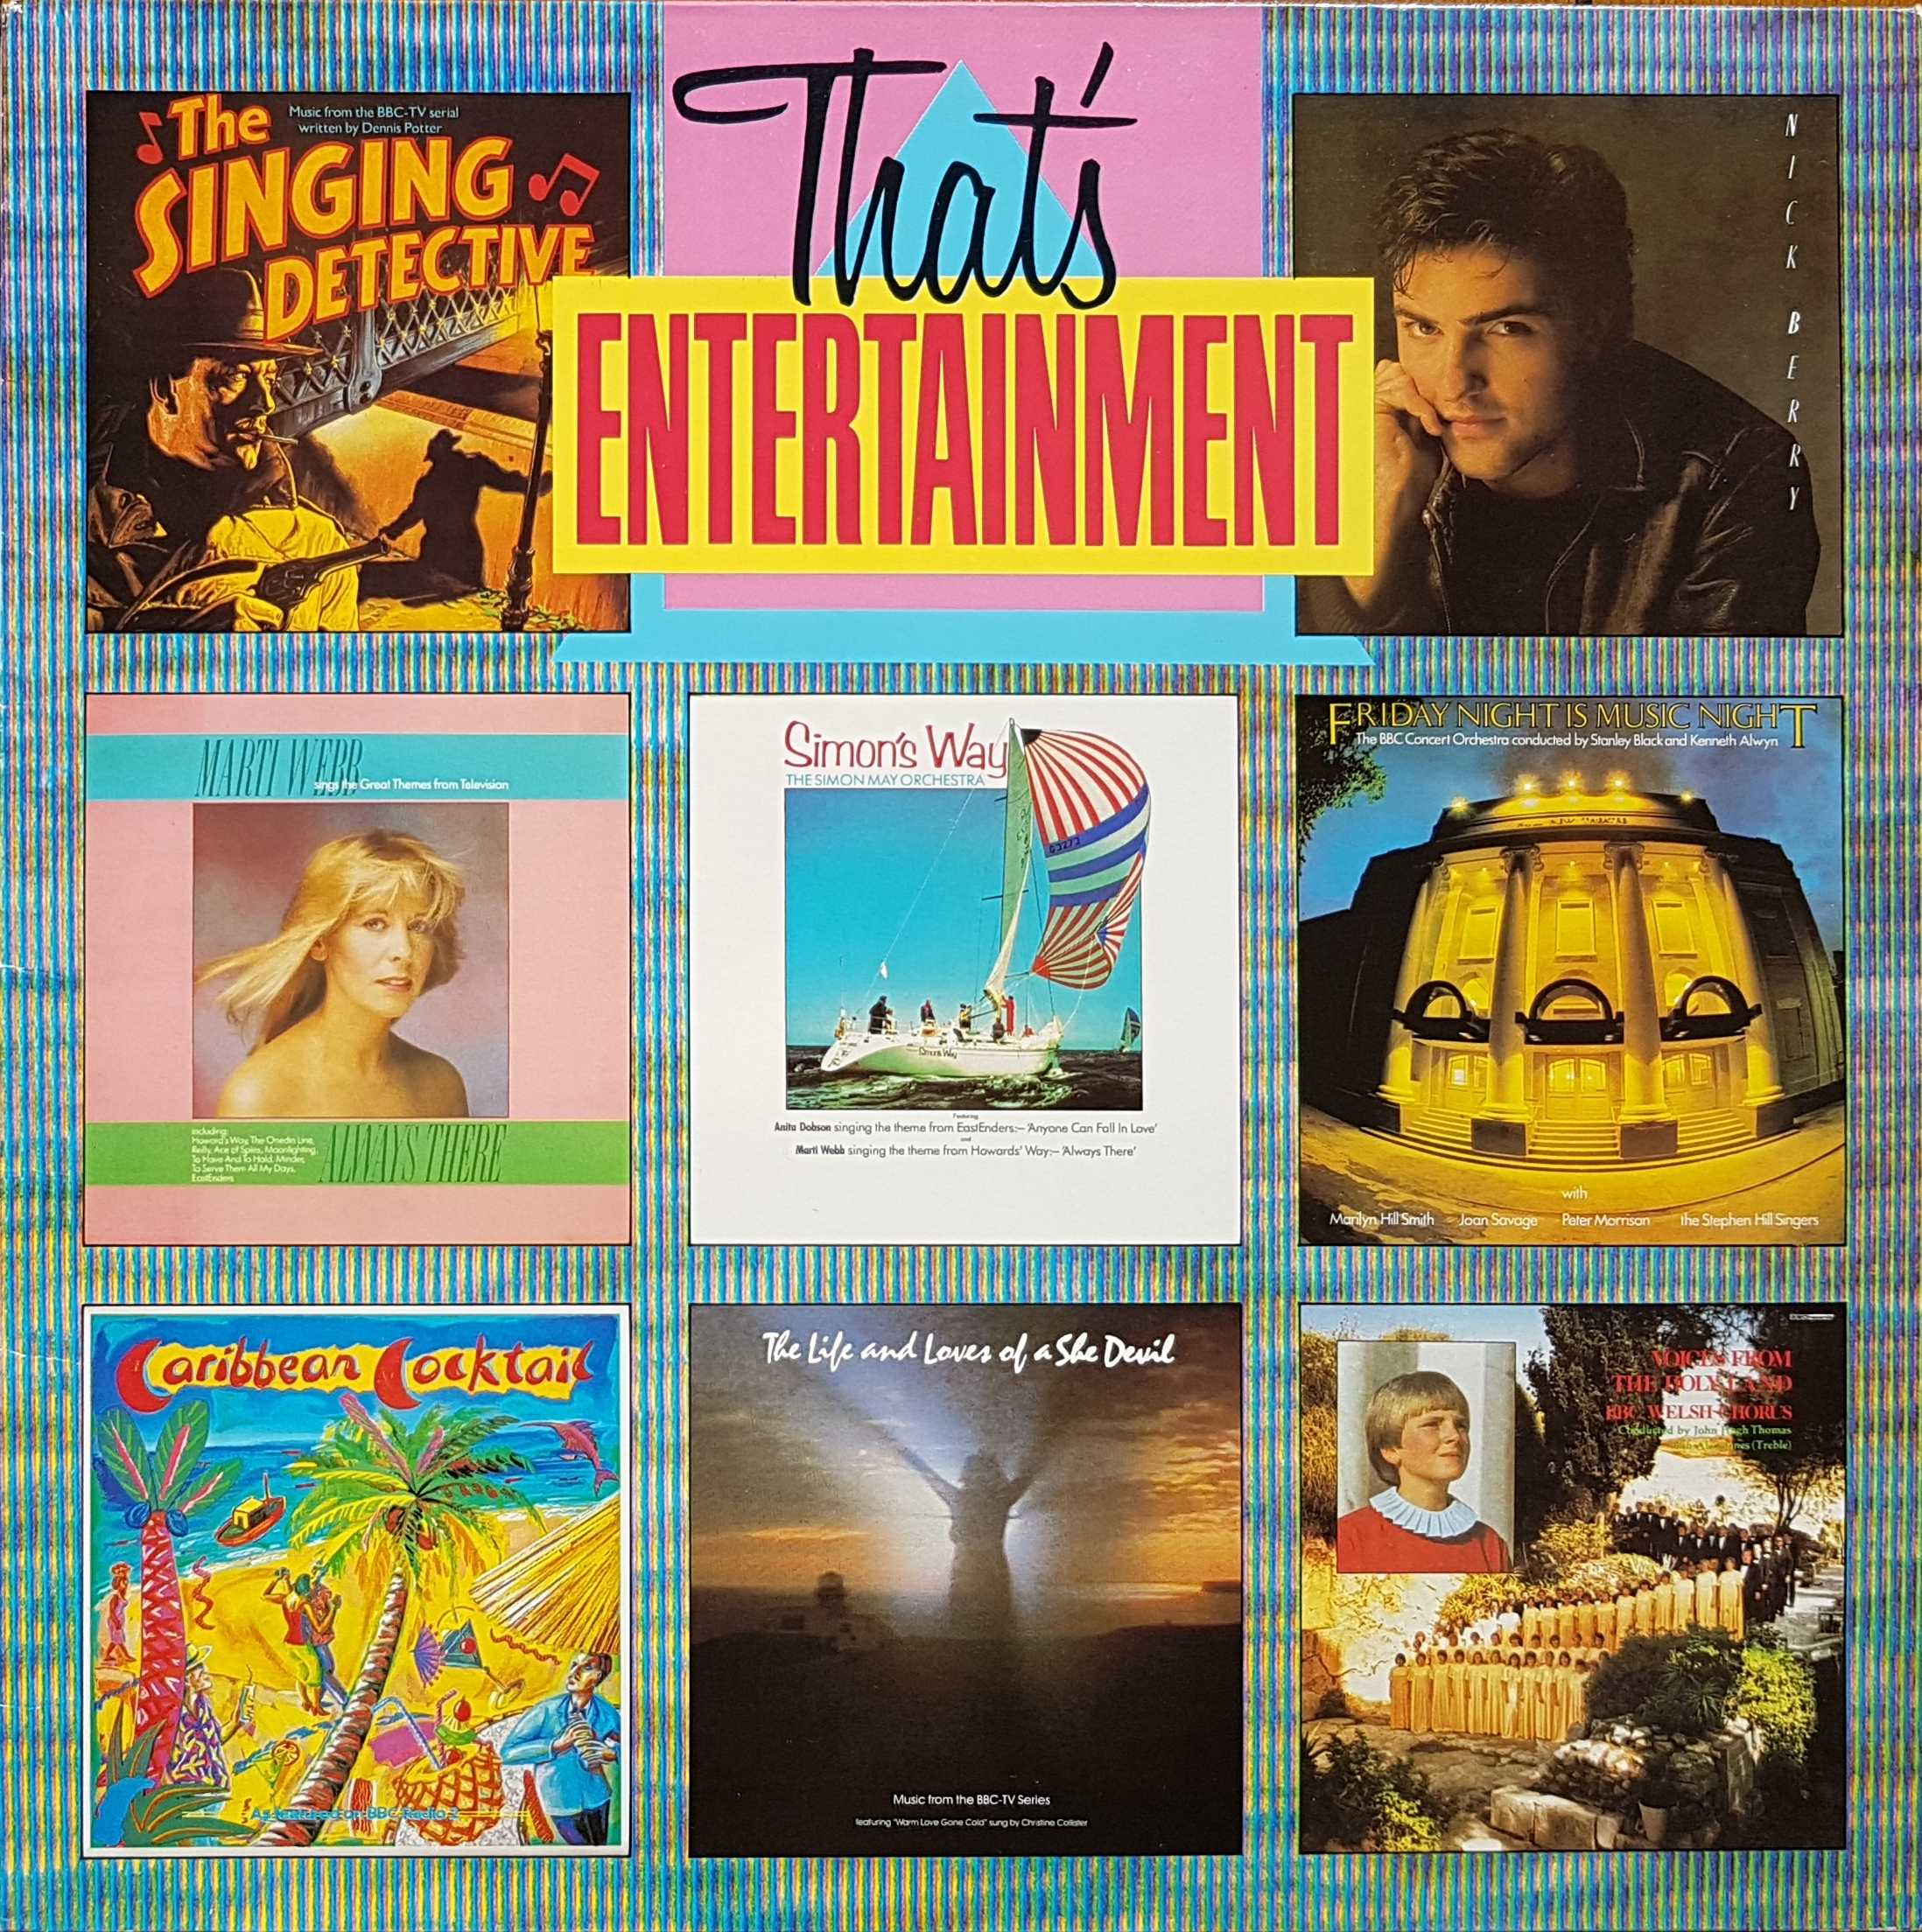 Picture of REC 638 That's entertainment by artist Various from the BBC albums - Records and Tapes library